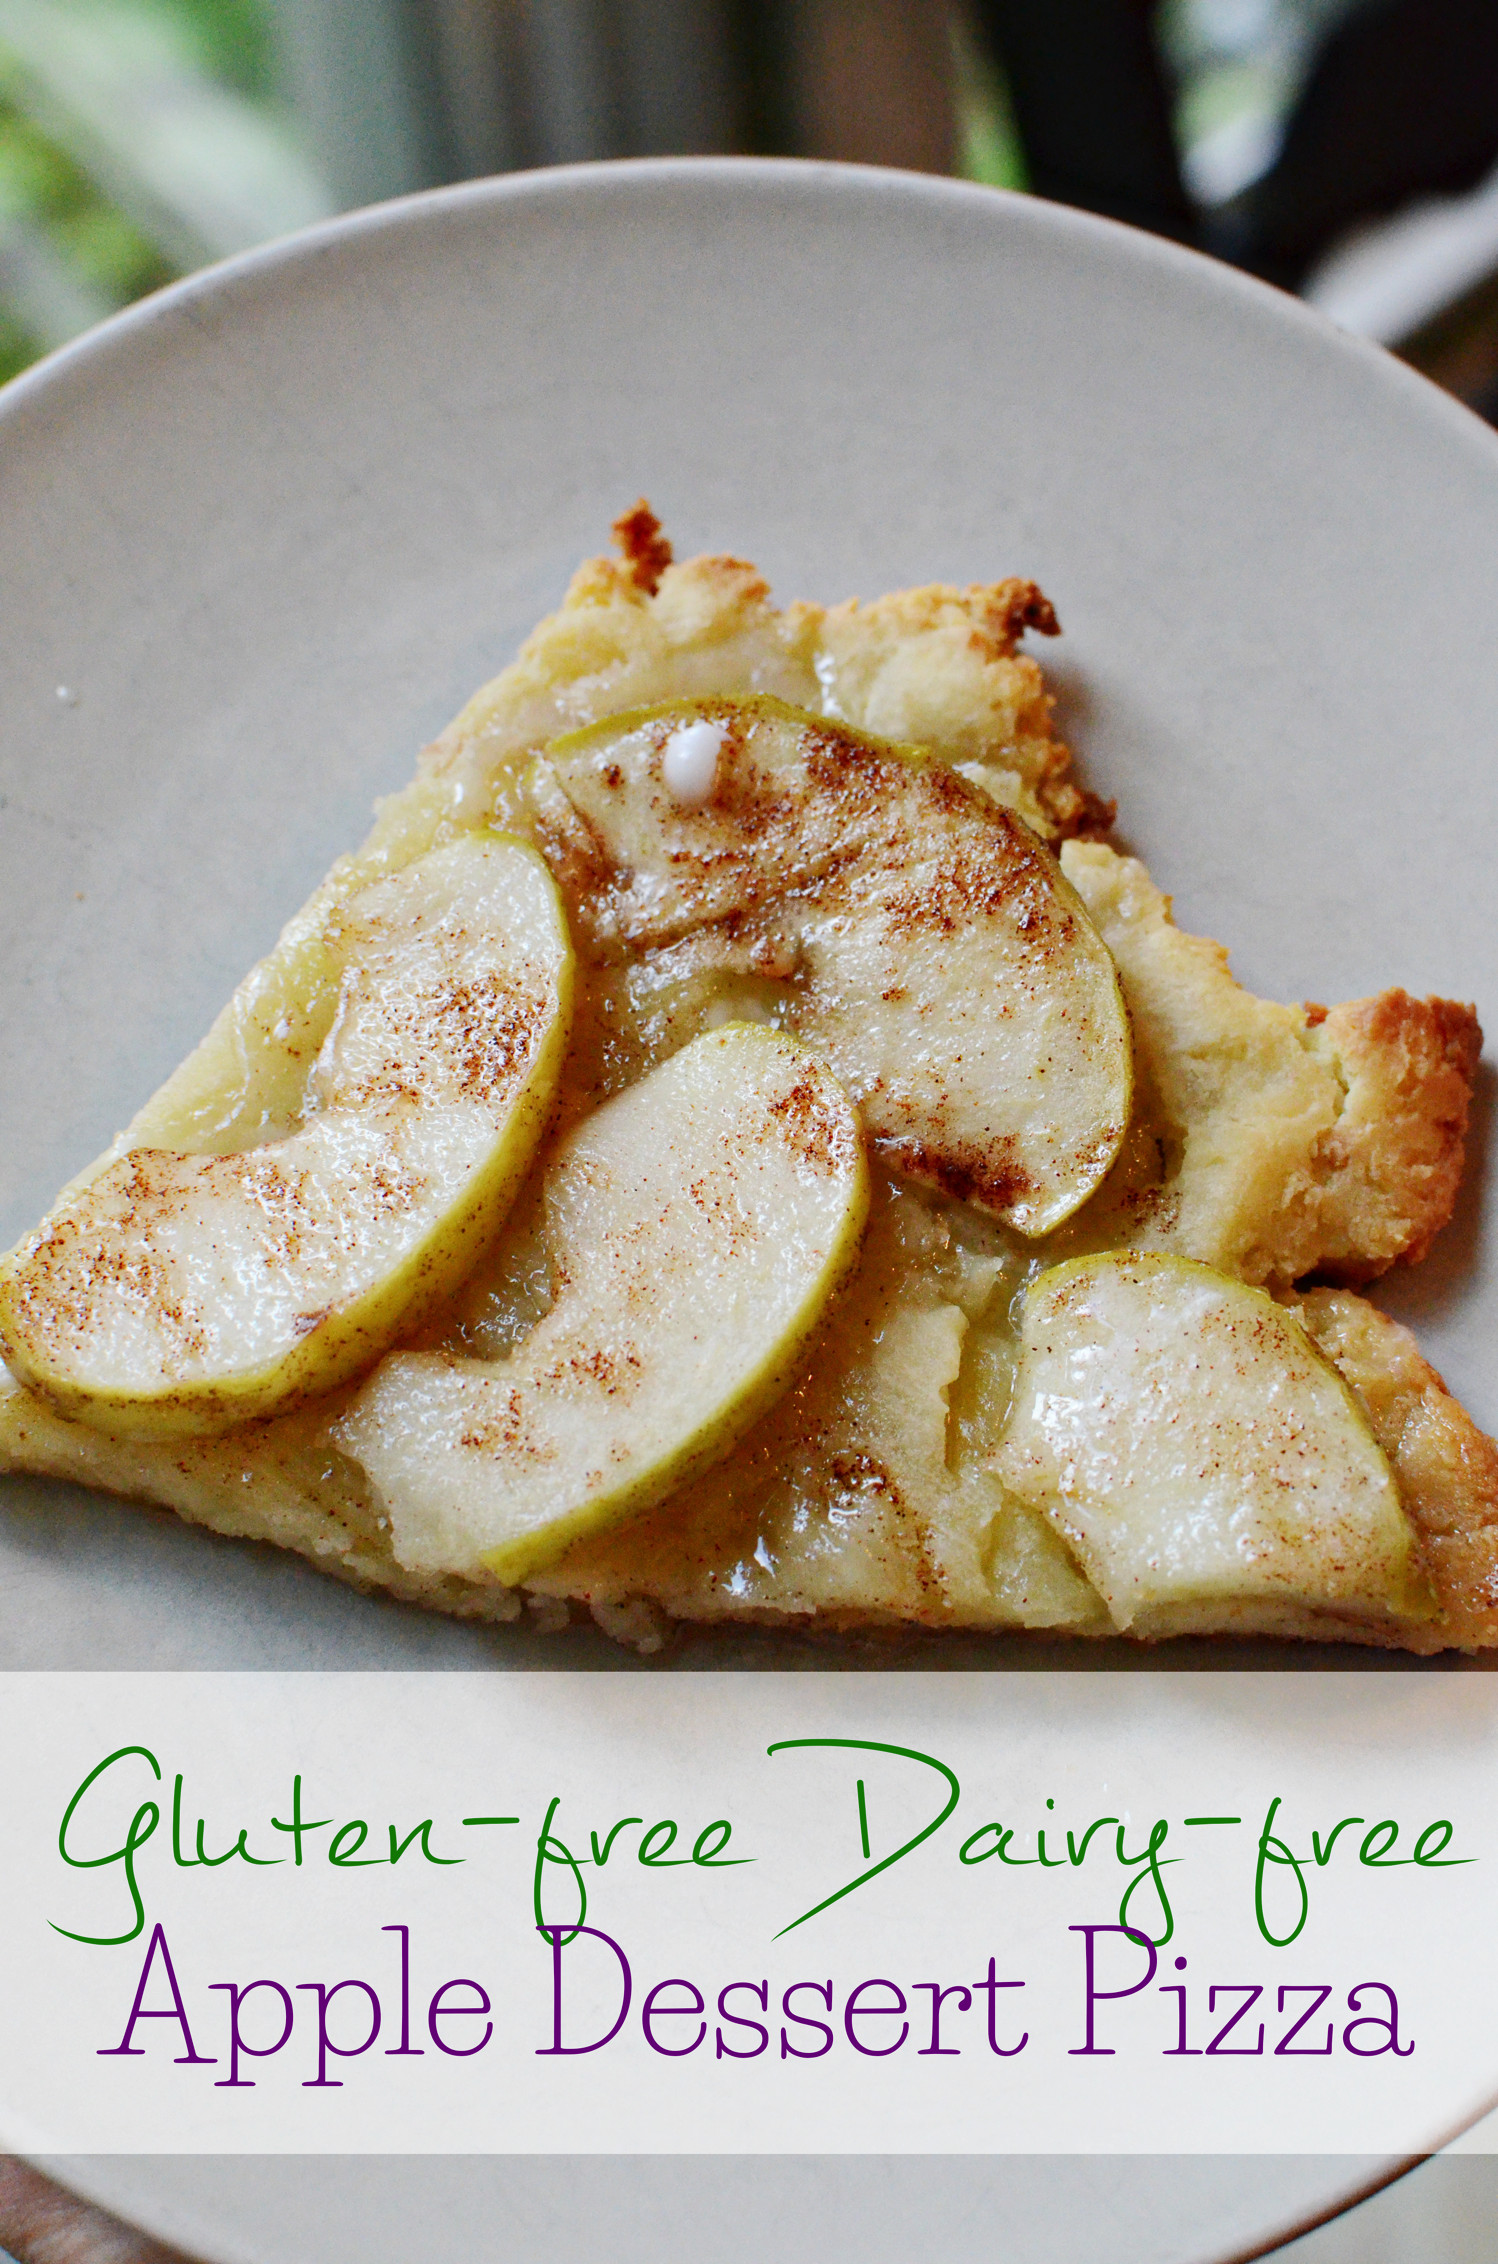 Dairy Free Desserts To Buy
 Gluten Free Dairy Free Apple Dessert Pizza • Really Are